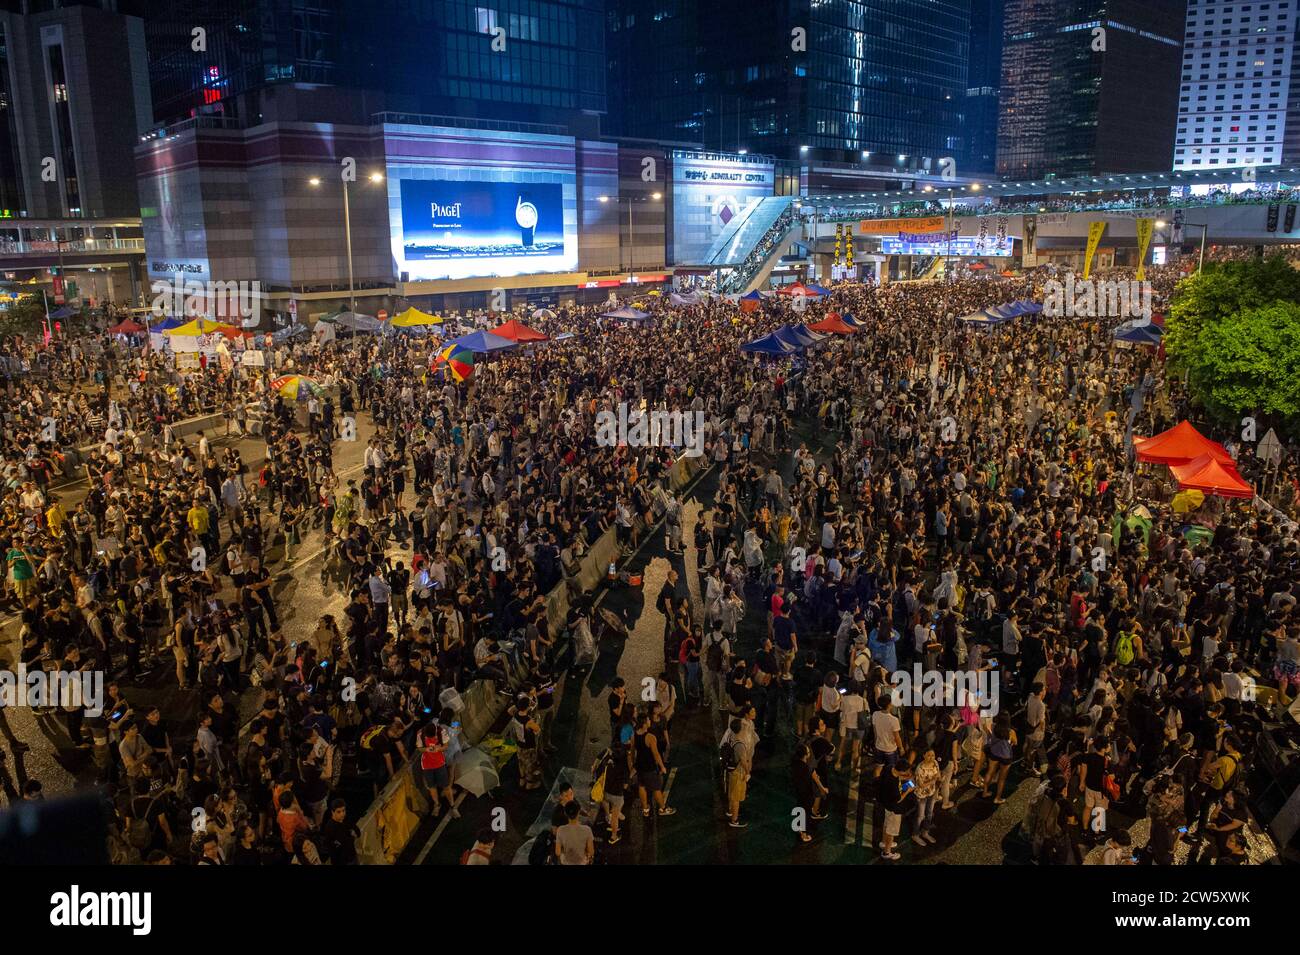 Hong Kong, Hong Kong, China. 3rd Oct, 2014. Protesters succeed in keeping Harcourt Road closed outside the Chief Executives office in the LegCo building, Tamar, Admiralty. Students maintain their pro-democracy sit-in while police take no action to stop them. Harcourt Road remains filled with protesters.Alamy Stock Image/Jayne Russell Credit: Jayne Russell/ZUMA Wire/Alamy Live News Stock Photo